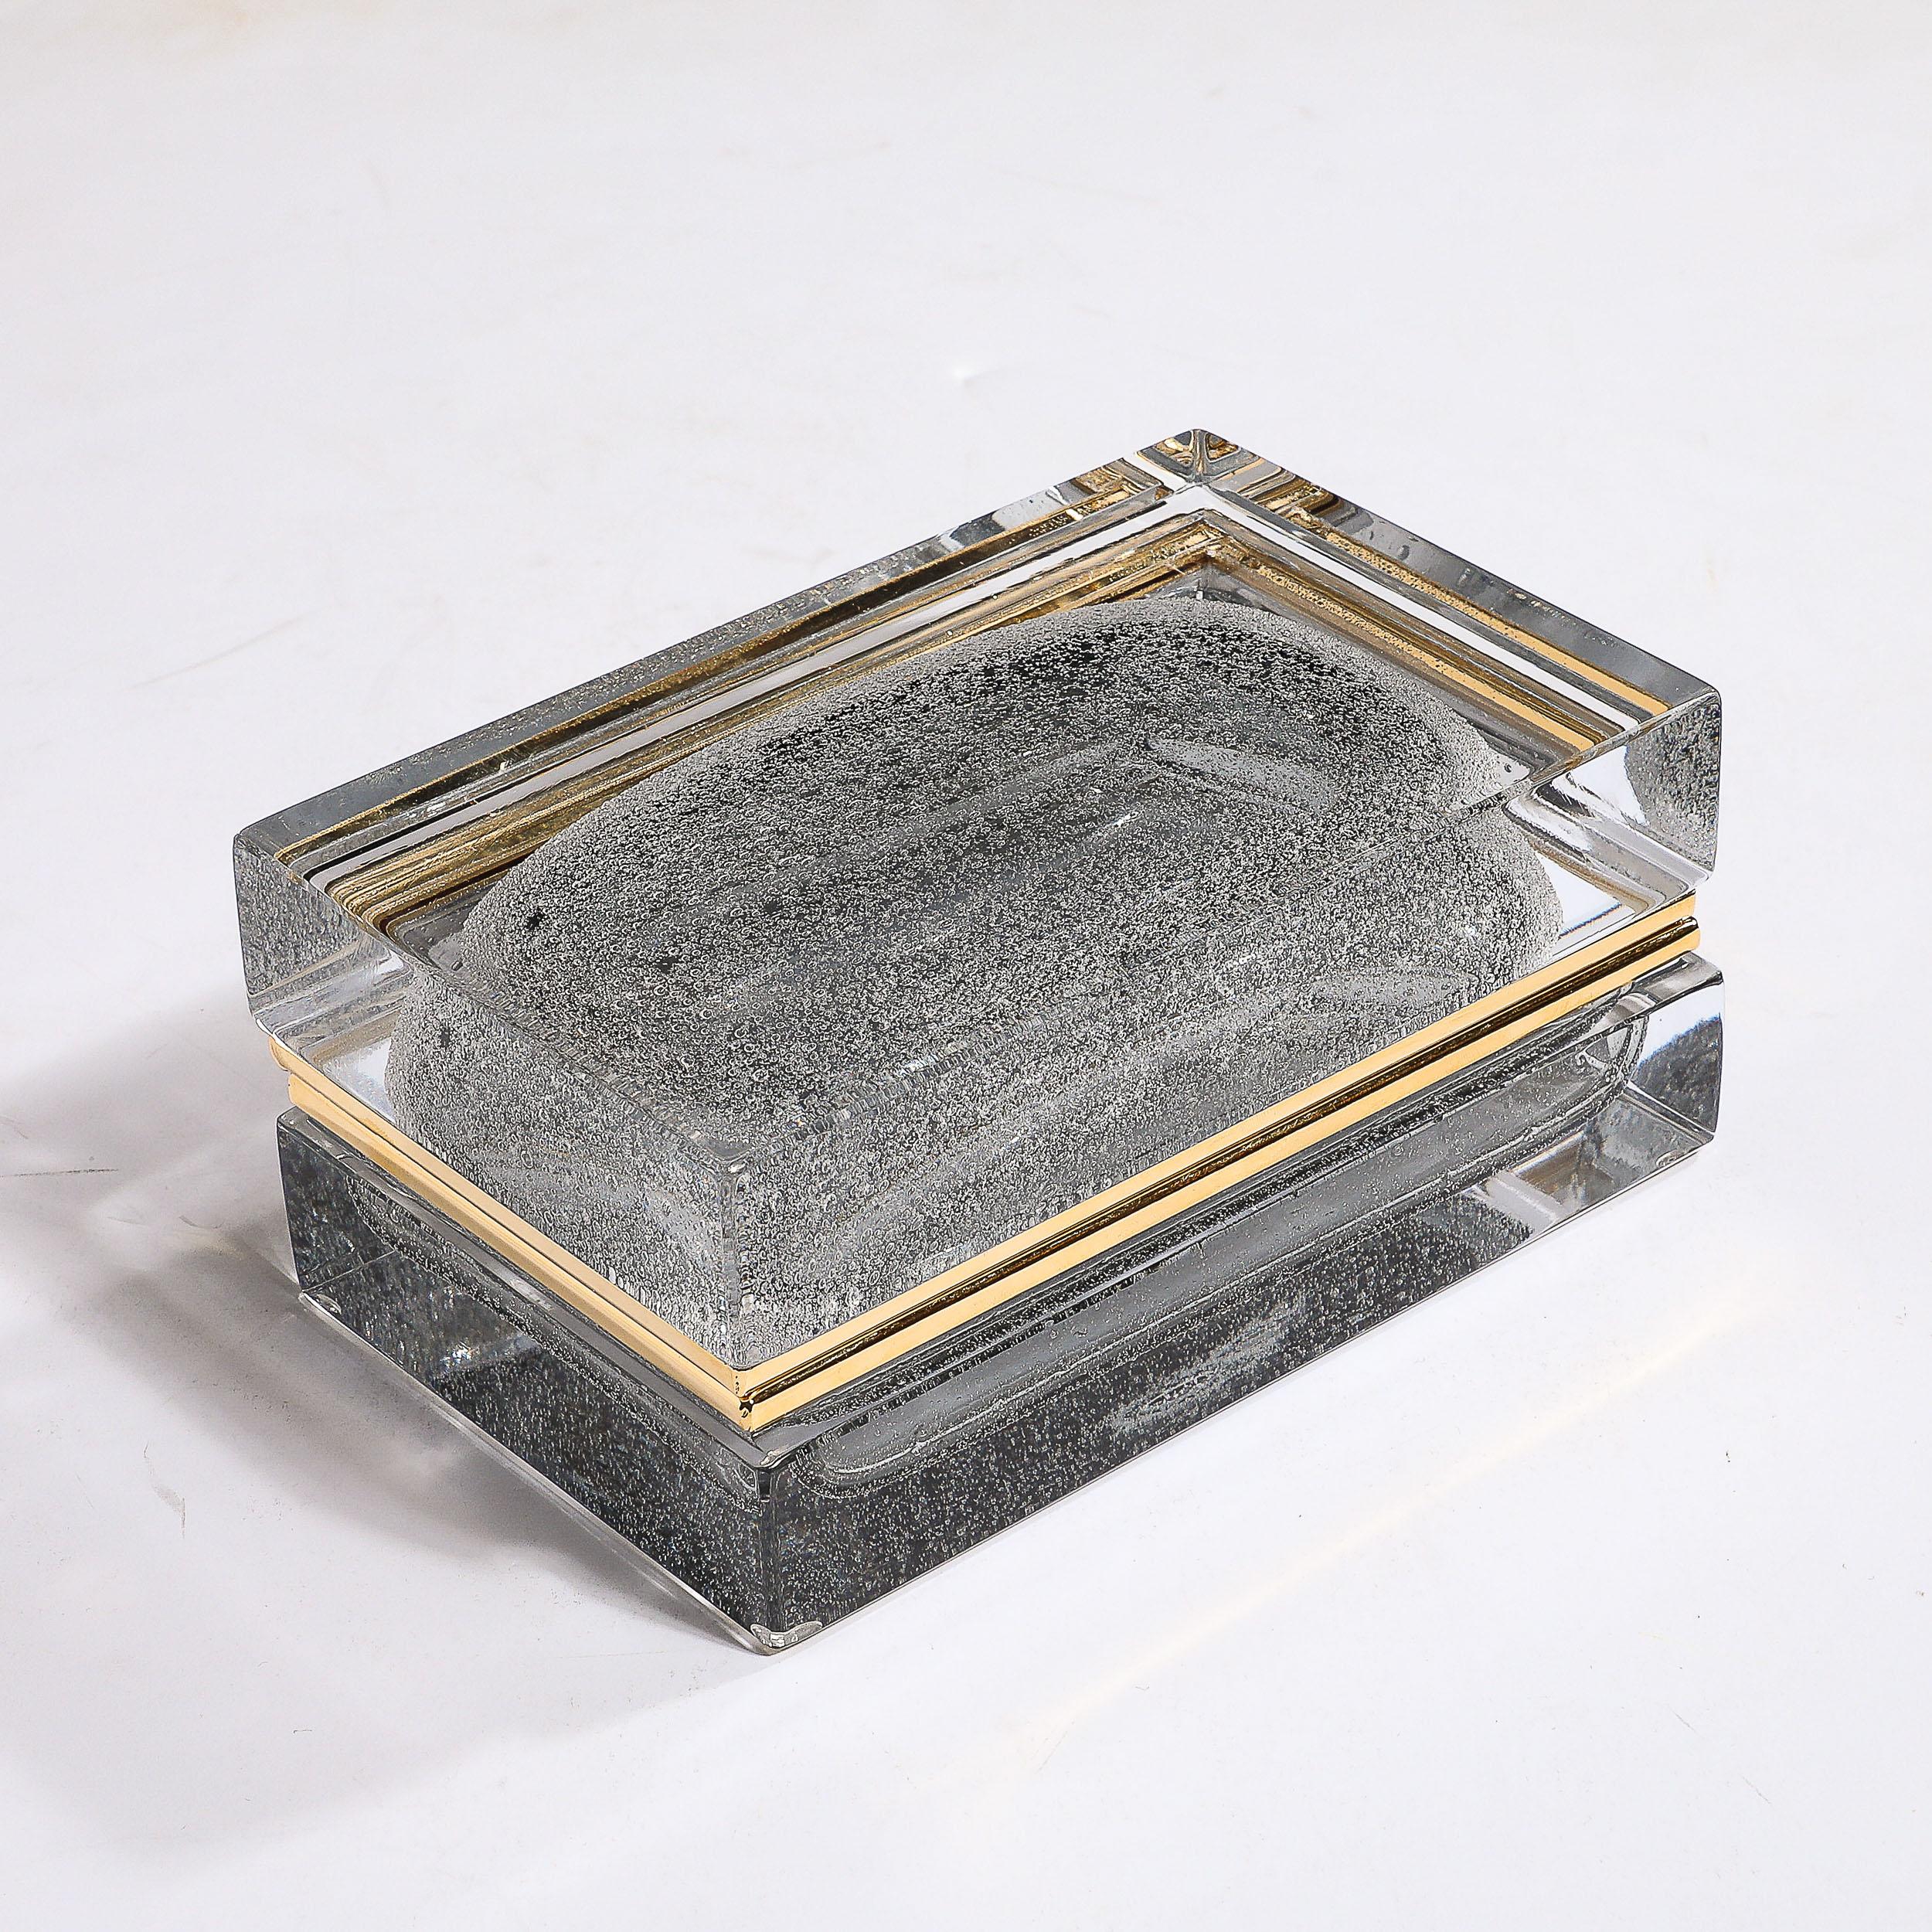 This sleek and beautifully formed Modernist Hand-Blown Murano Glass Box W/Grey Bullicante Detailing and Brass Fittings originates from Italy during the 21st Century. This box is rectangular in form in remarkably high quality transparent glass with